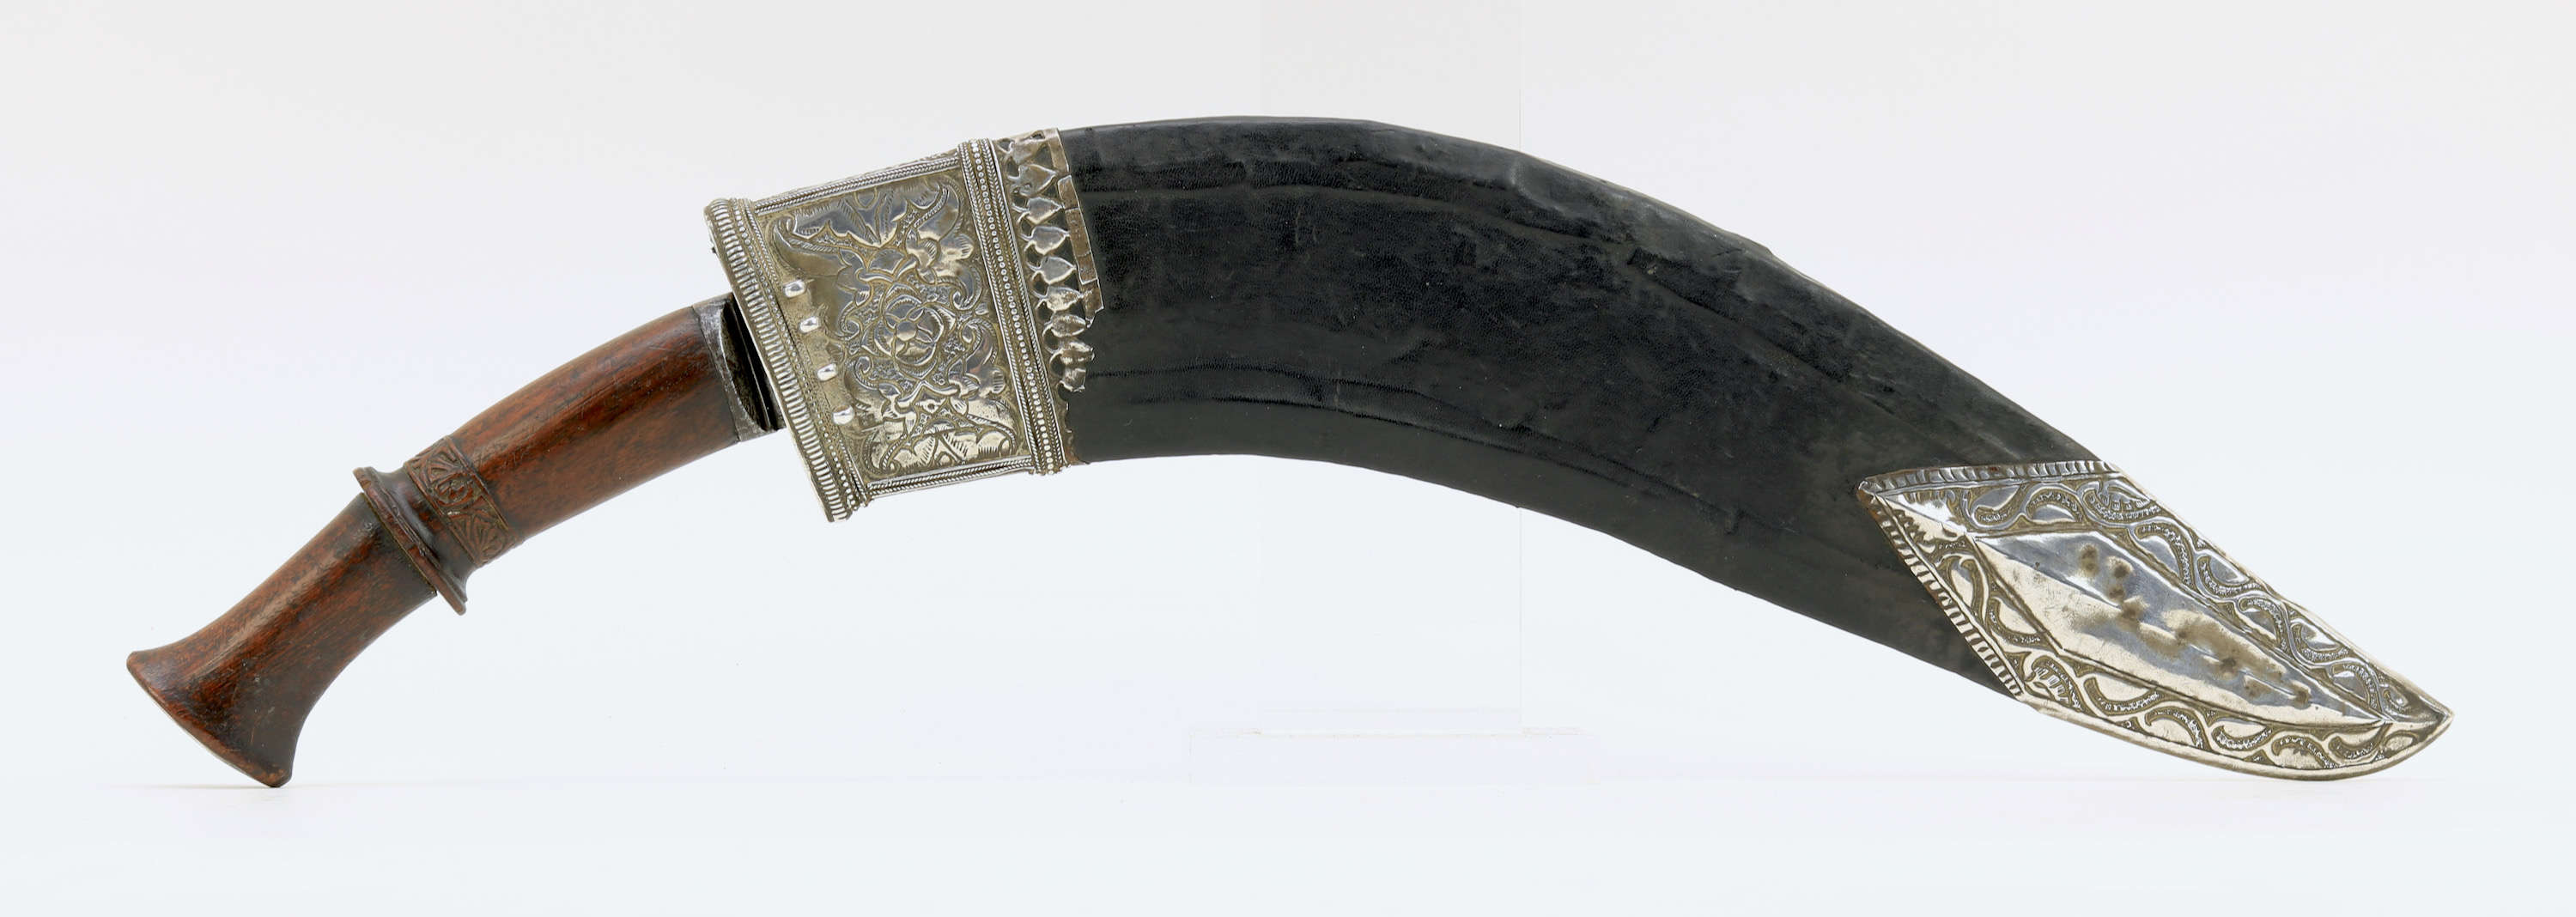 Early 19th century hanshee khukuri with left oriented scabbard